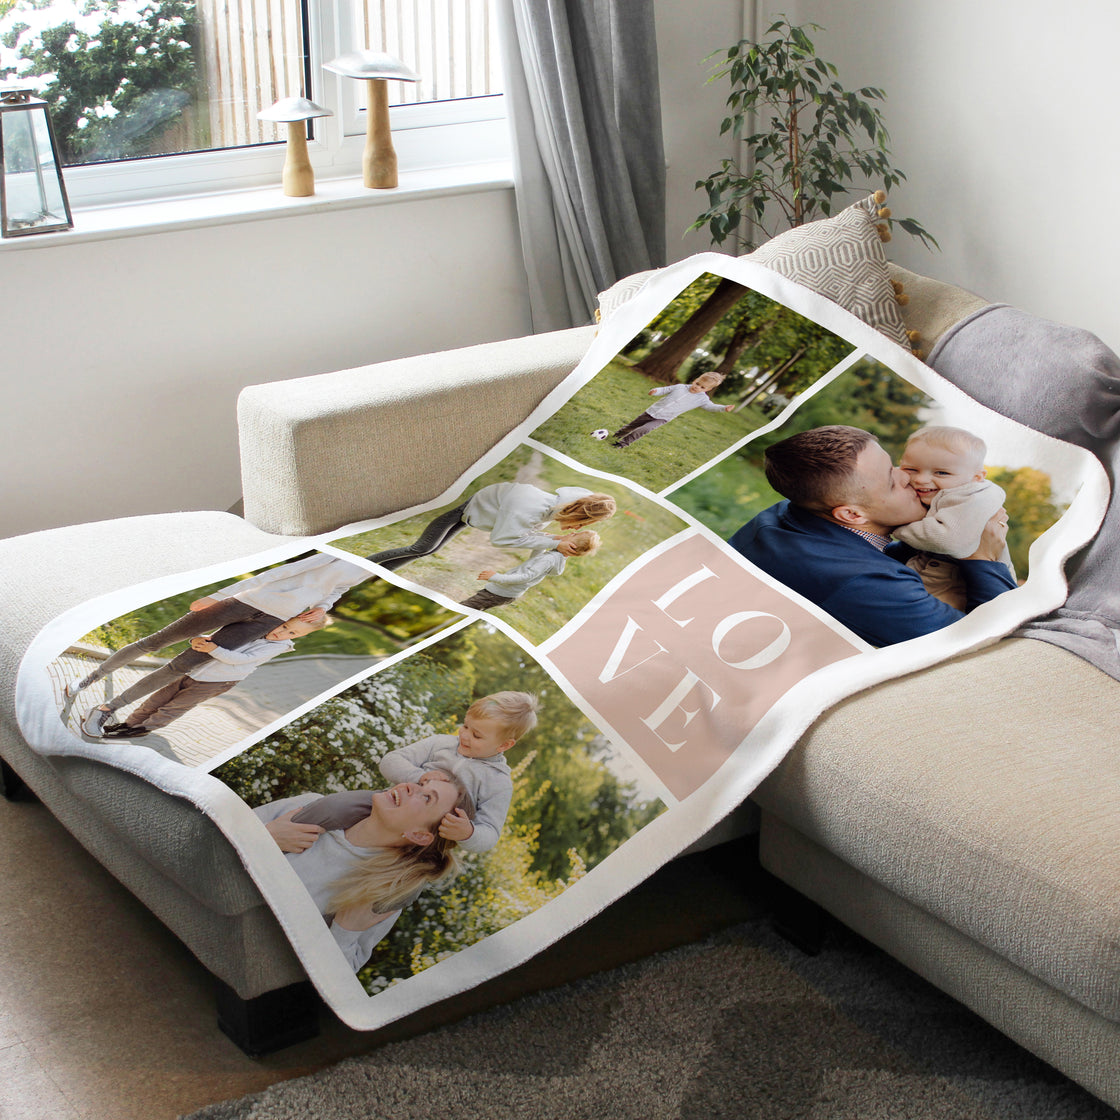 Five Photo Blanket - Love Collage - Mothers Day Gift - Custom Gifts 